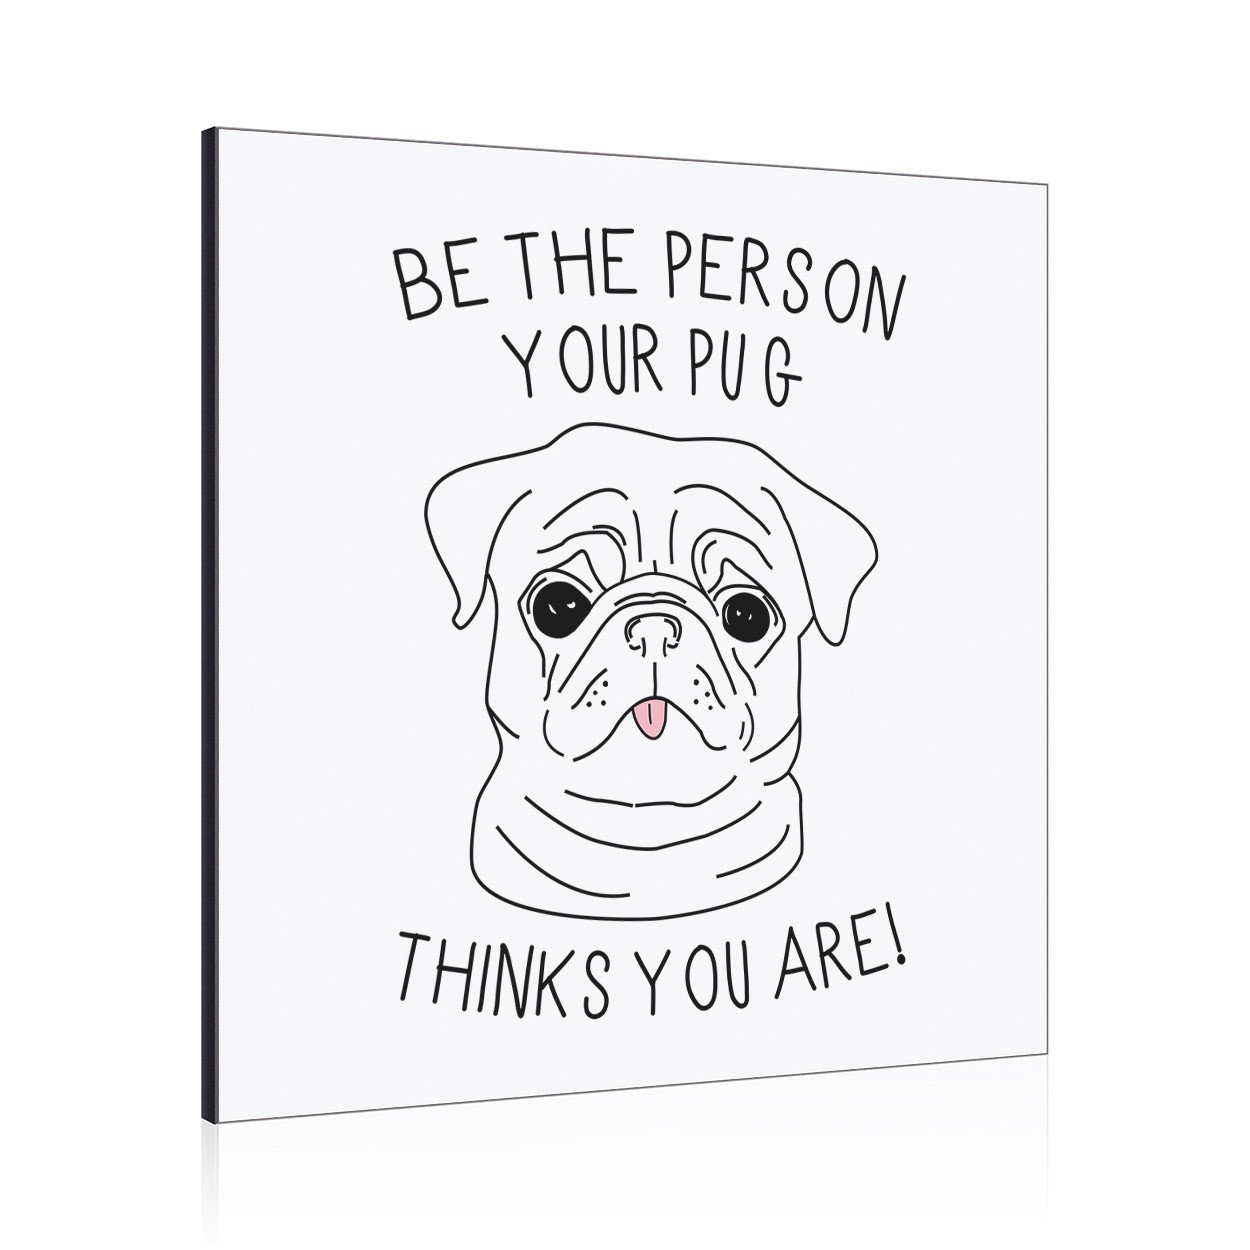 Be The Person Your Pug Thinks You Are Wall Art Panel